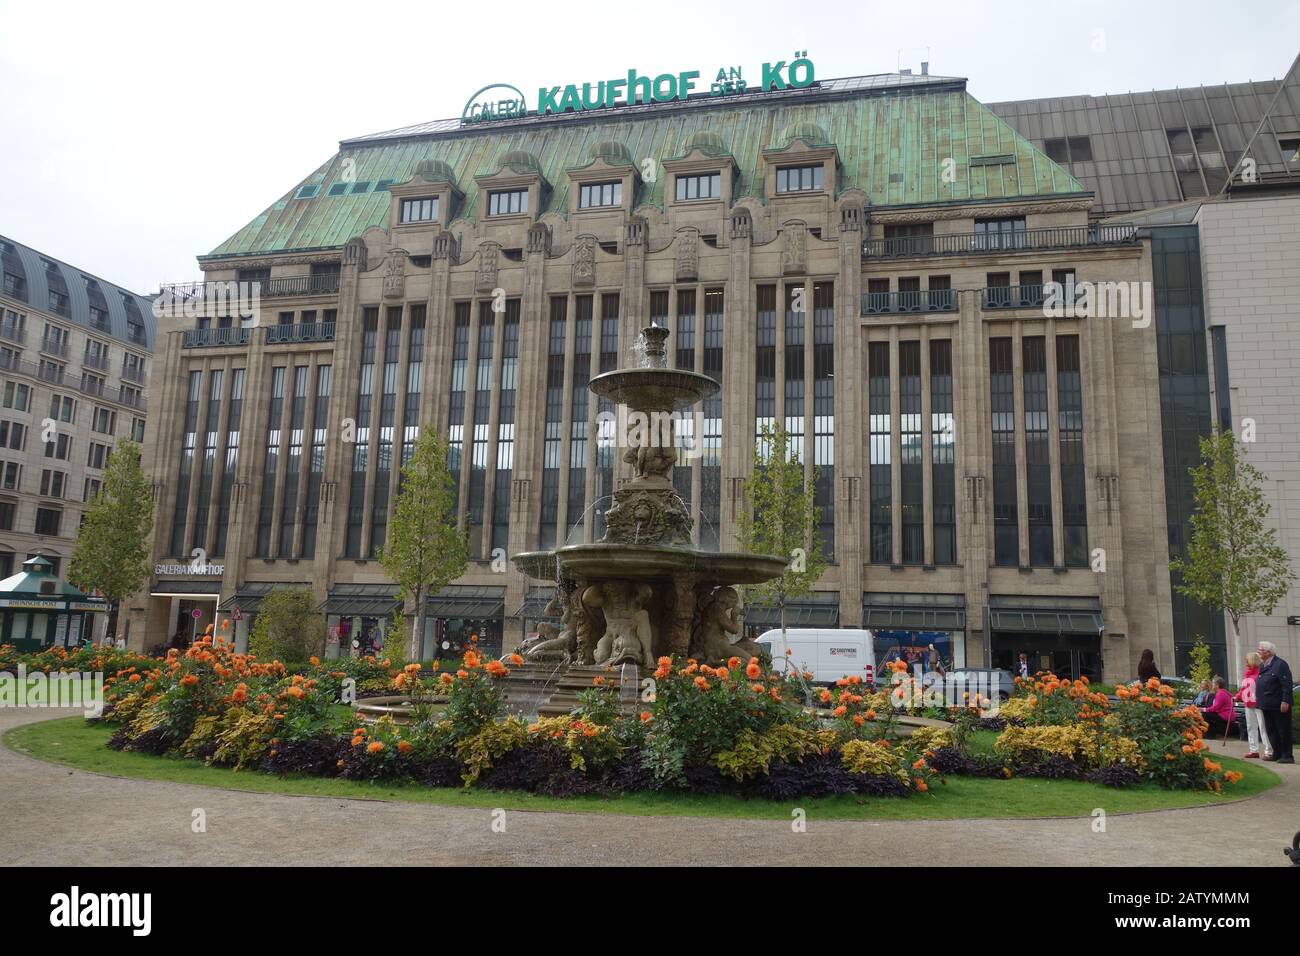 The exterior of the Galeria Kaufhof department store located on the Konigsallee boulevard in Dusseldorf, Germany. Stock Photo